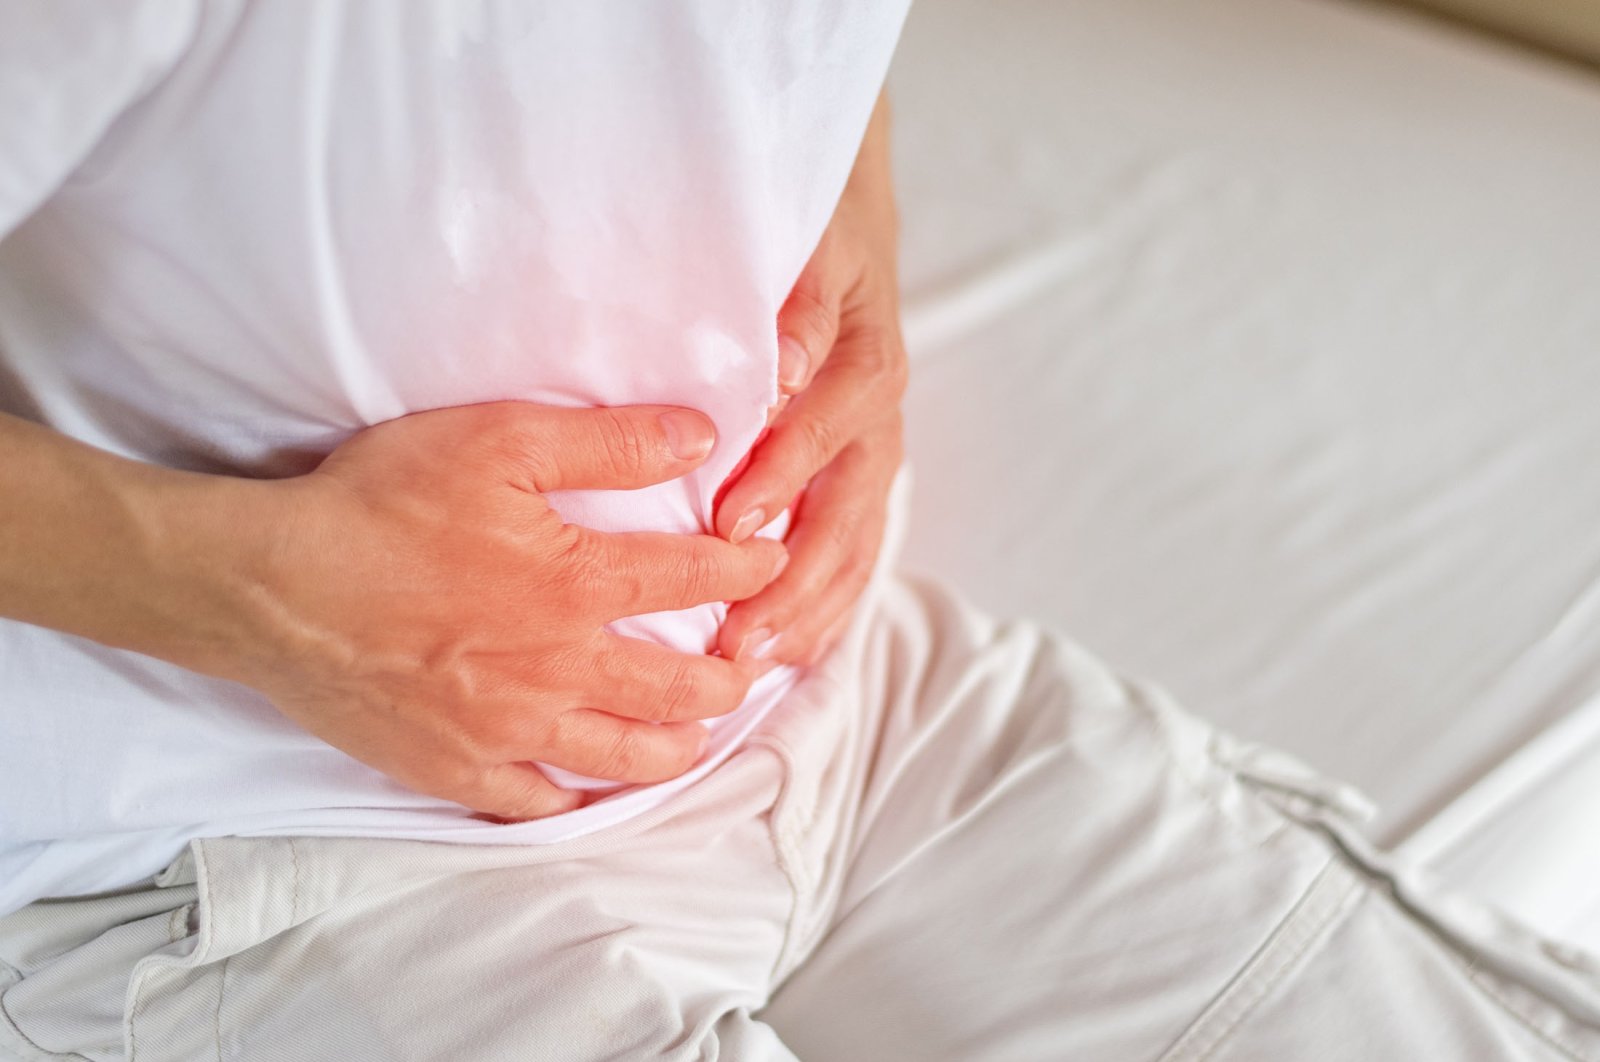 A person with irritable bowel syndrome may suffer stomach pain, diarrhea. (Shutterstock Photo)